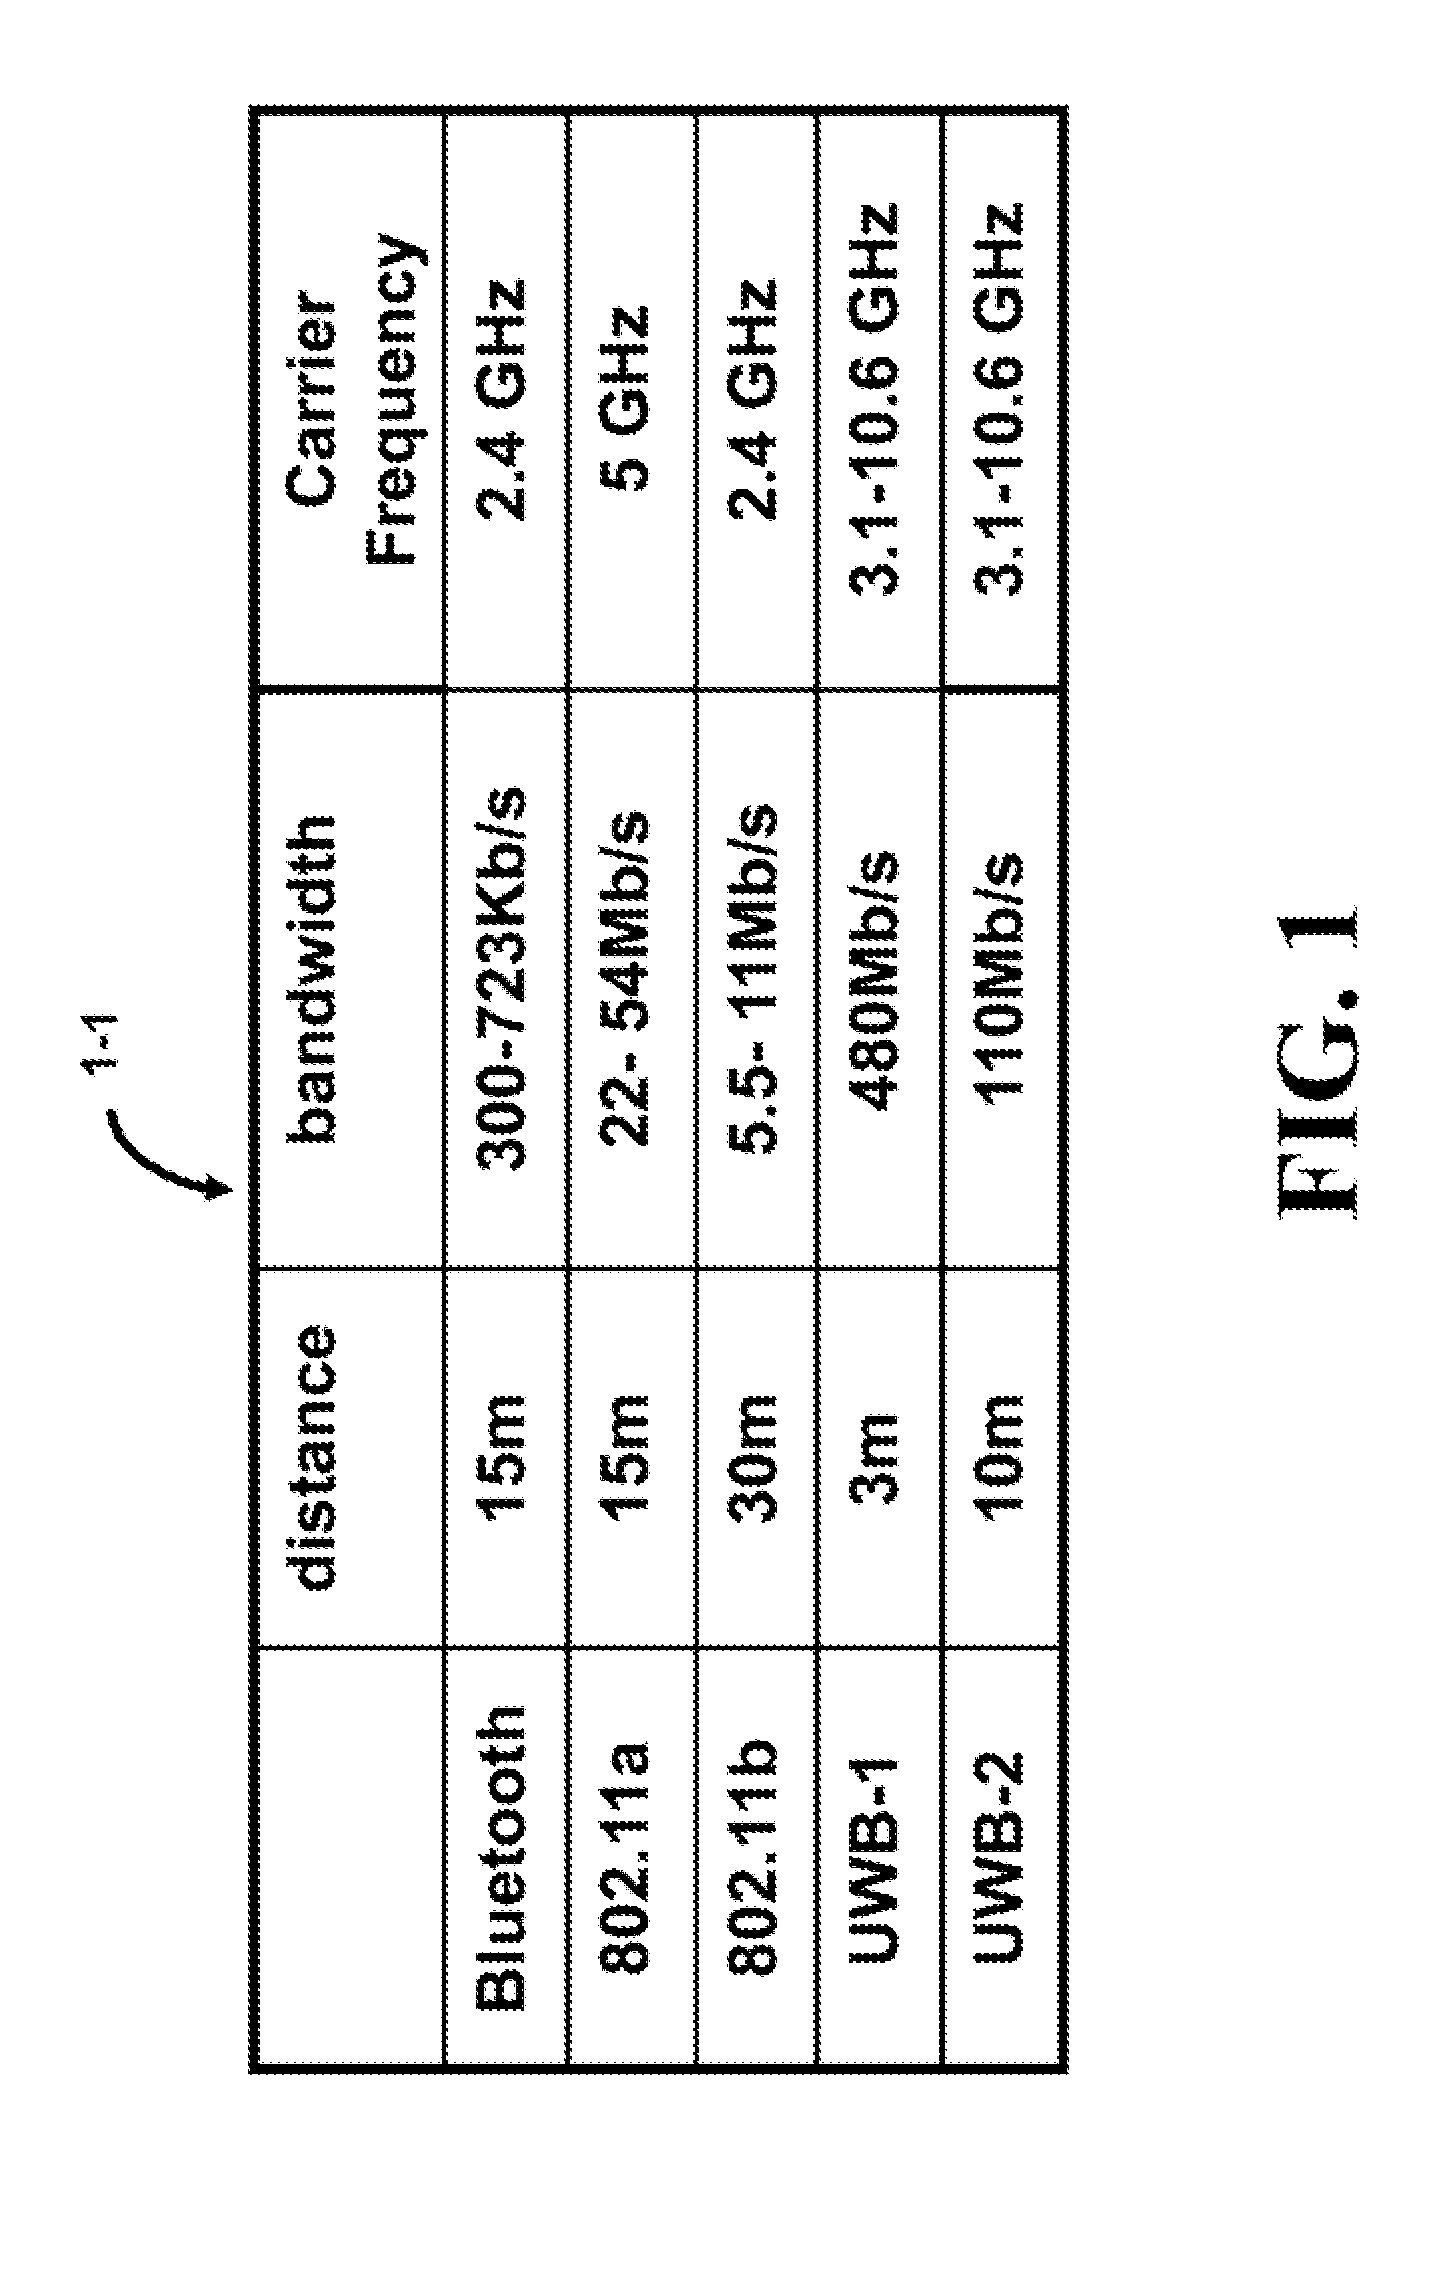 Apparatus and method of a configurable network